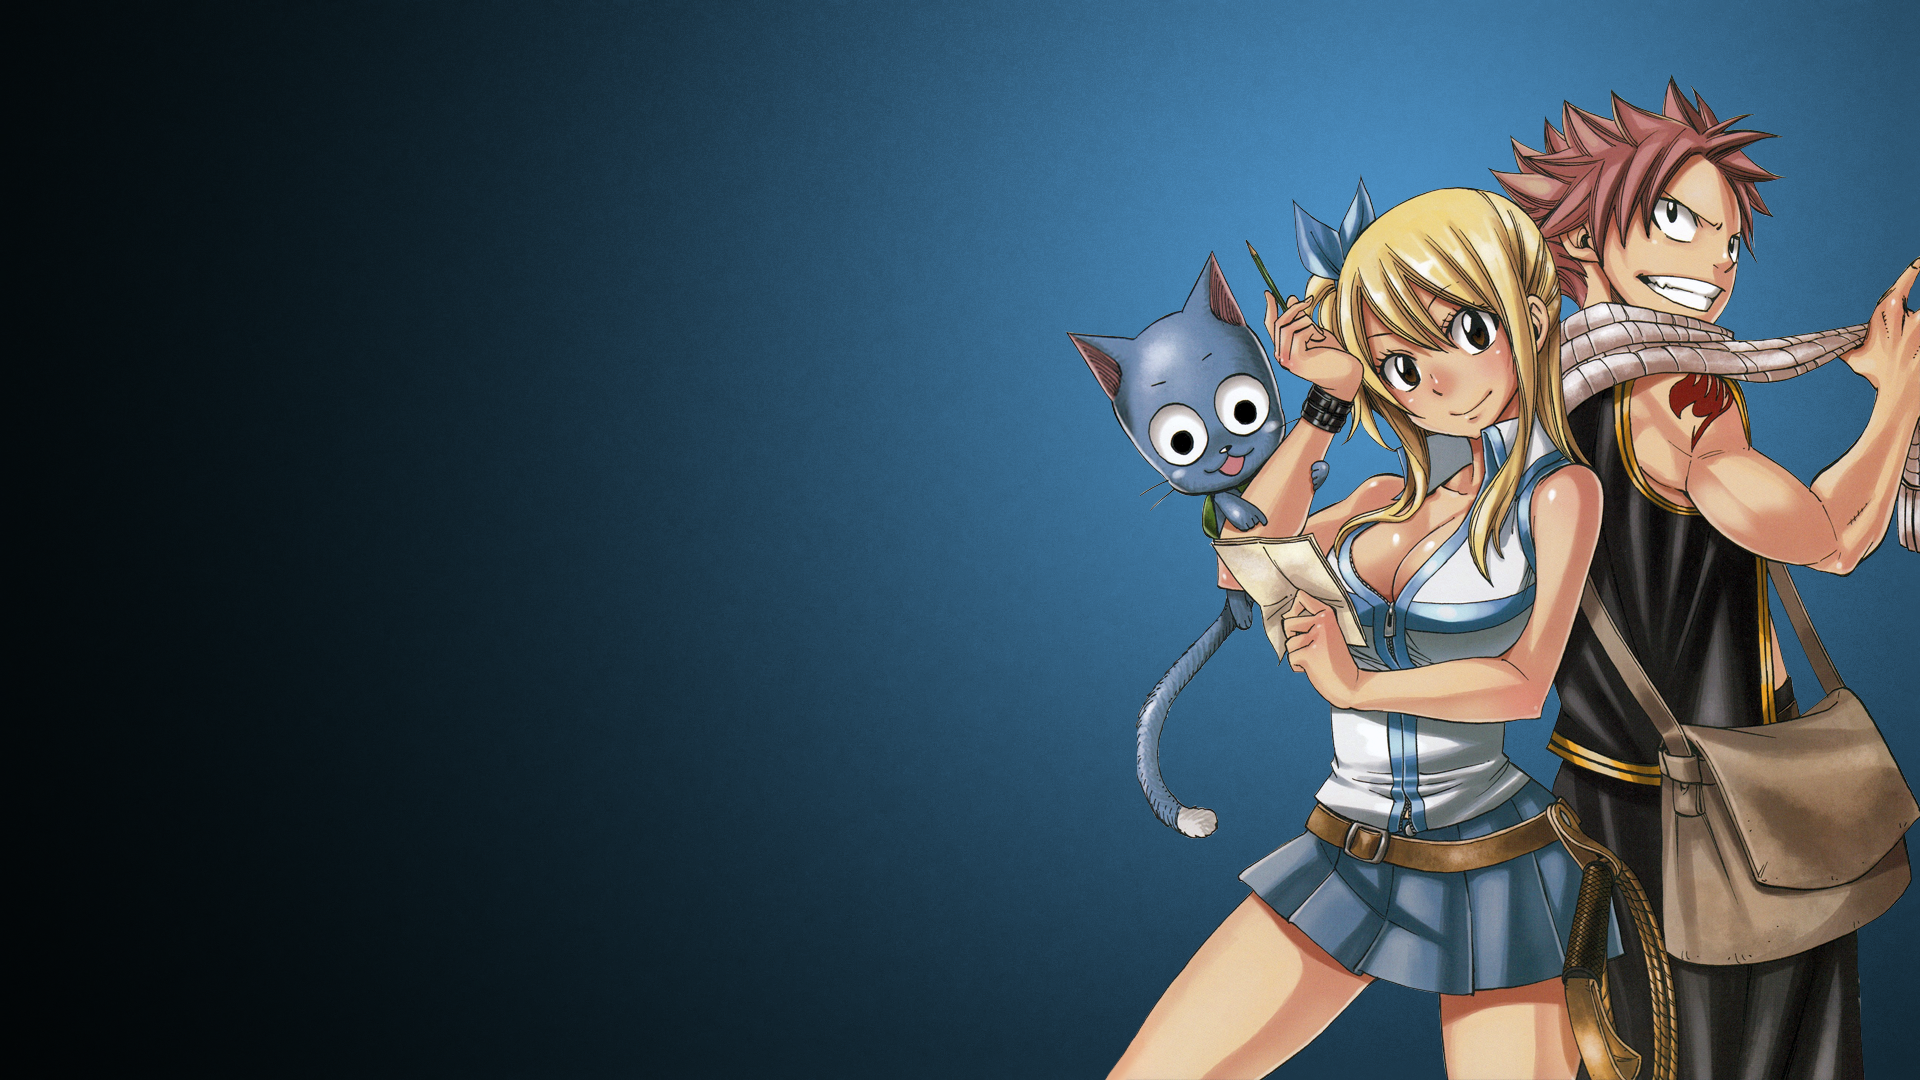 220 Fairy Tail HD Wallpapers | Backgrounds - Wallpaper Abyss - Page 2